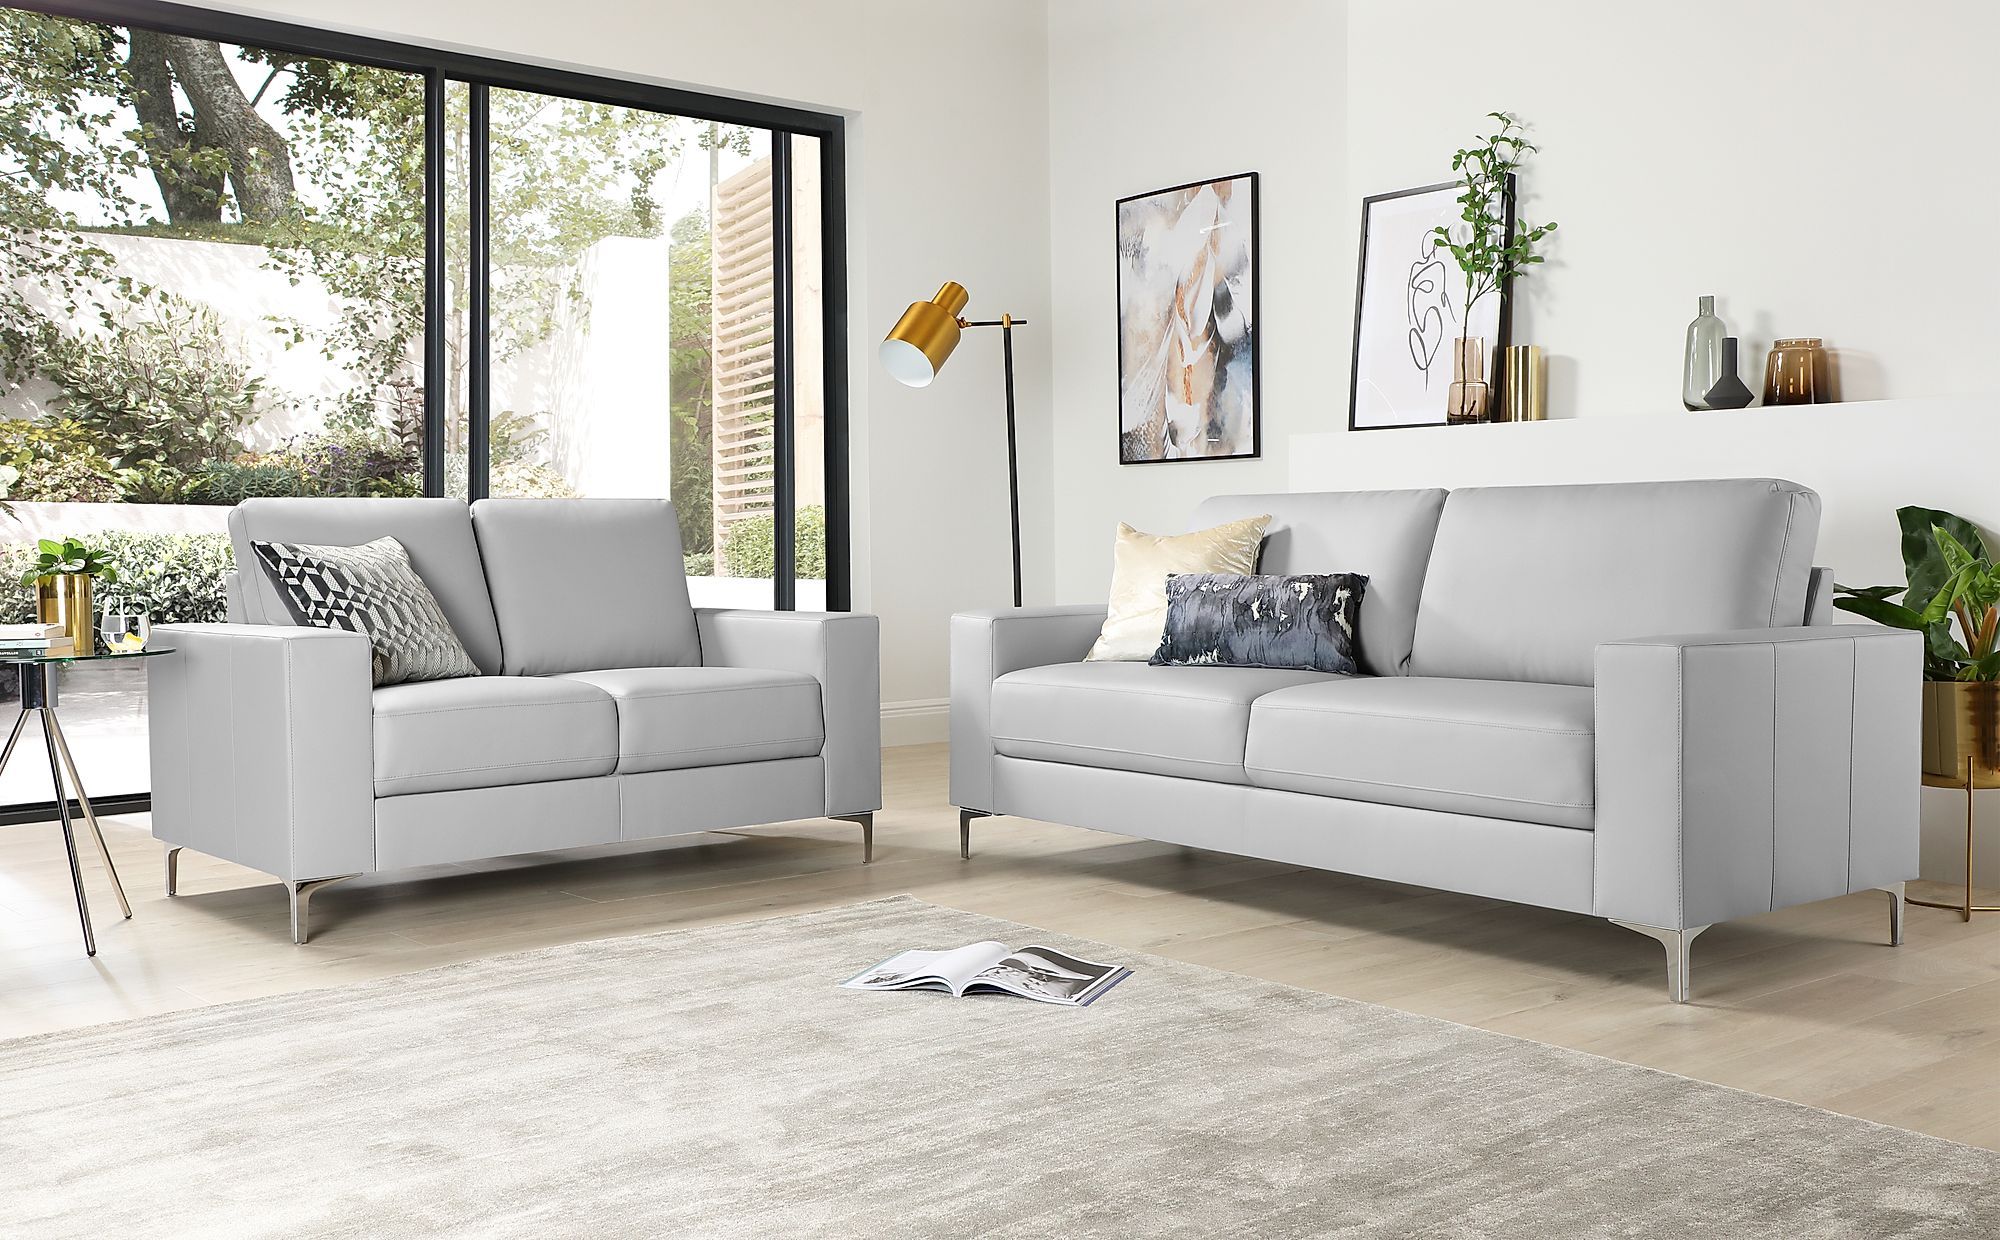 Baltimore Light Grey Leather 3+2 Seater Sofa Set | Furniture Choice Within Sofas In Light Grey (View 5 of 20)